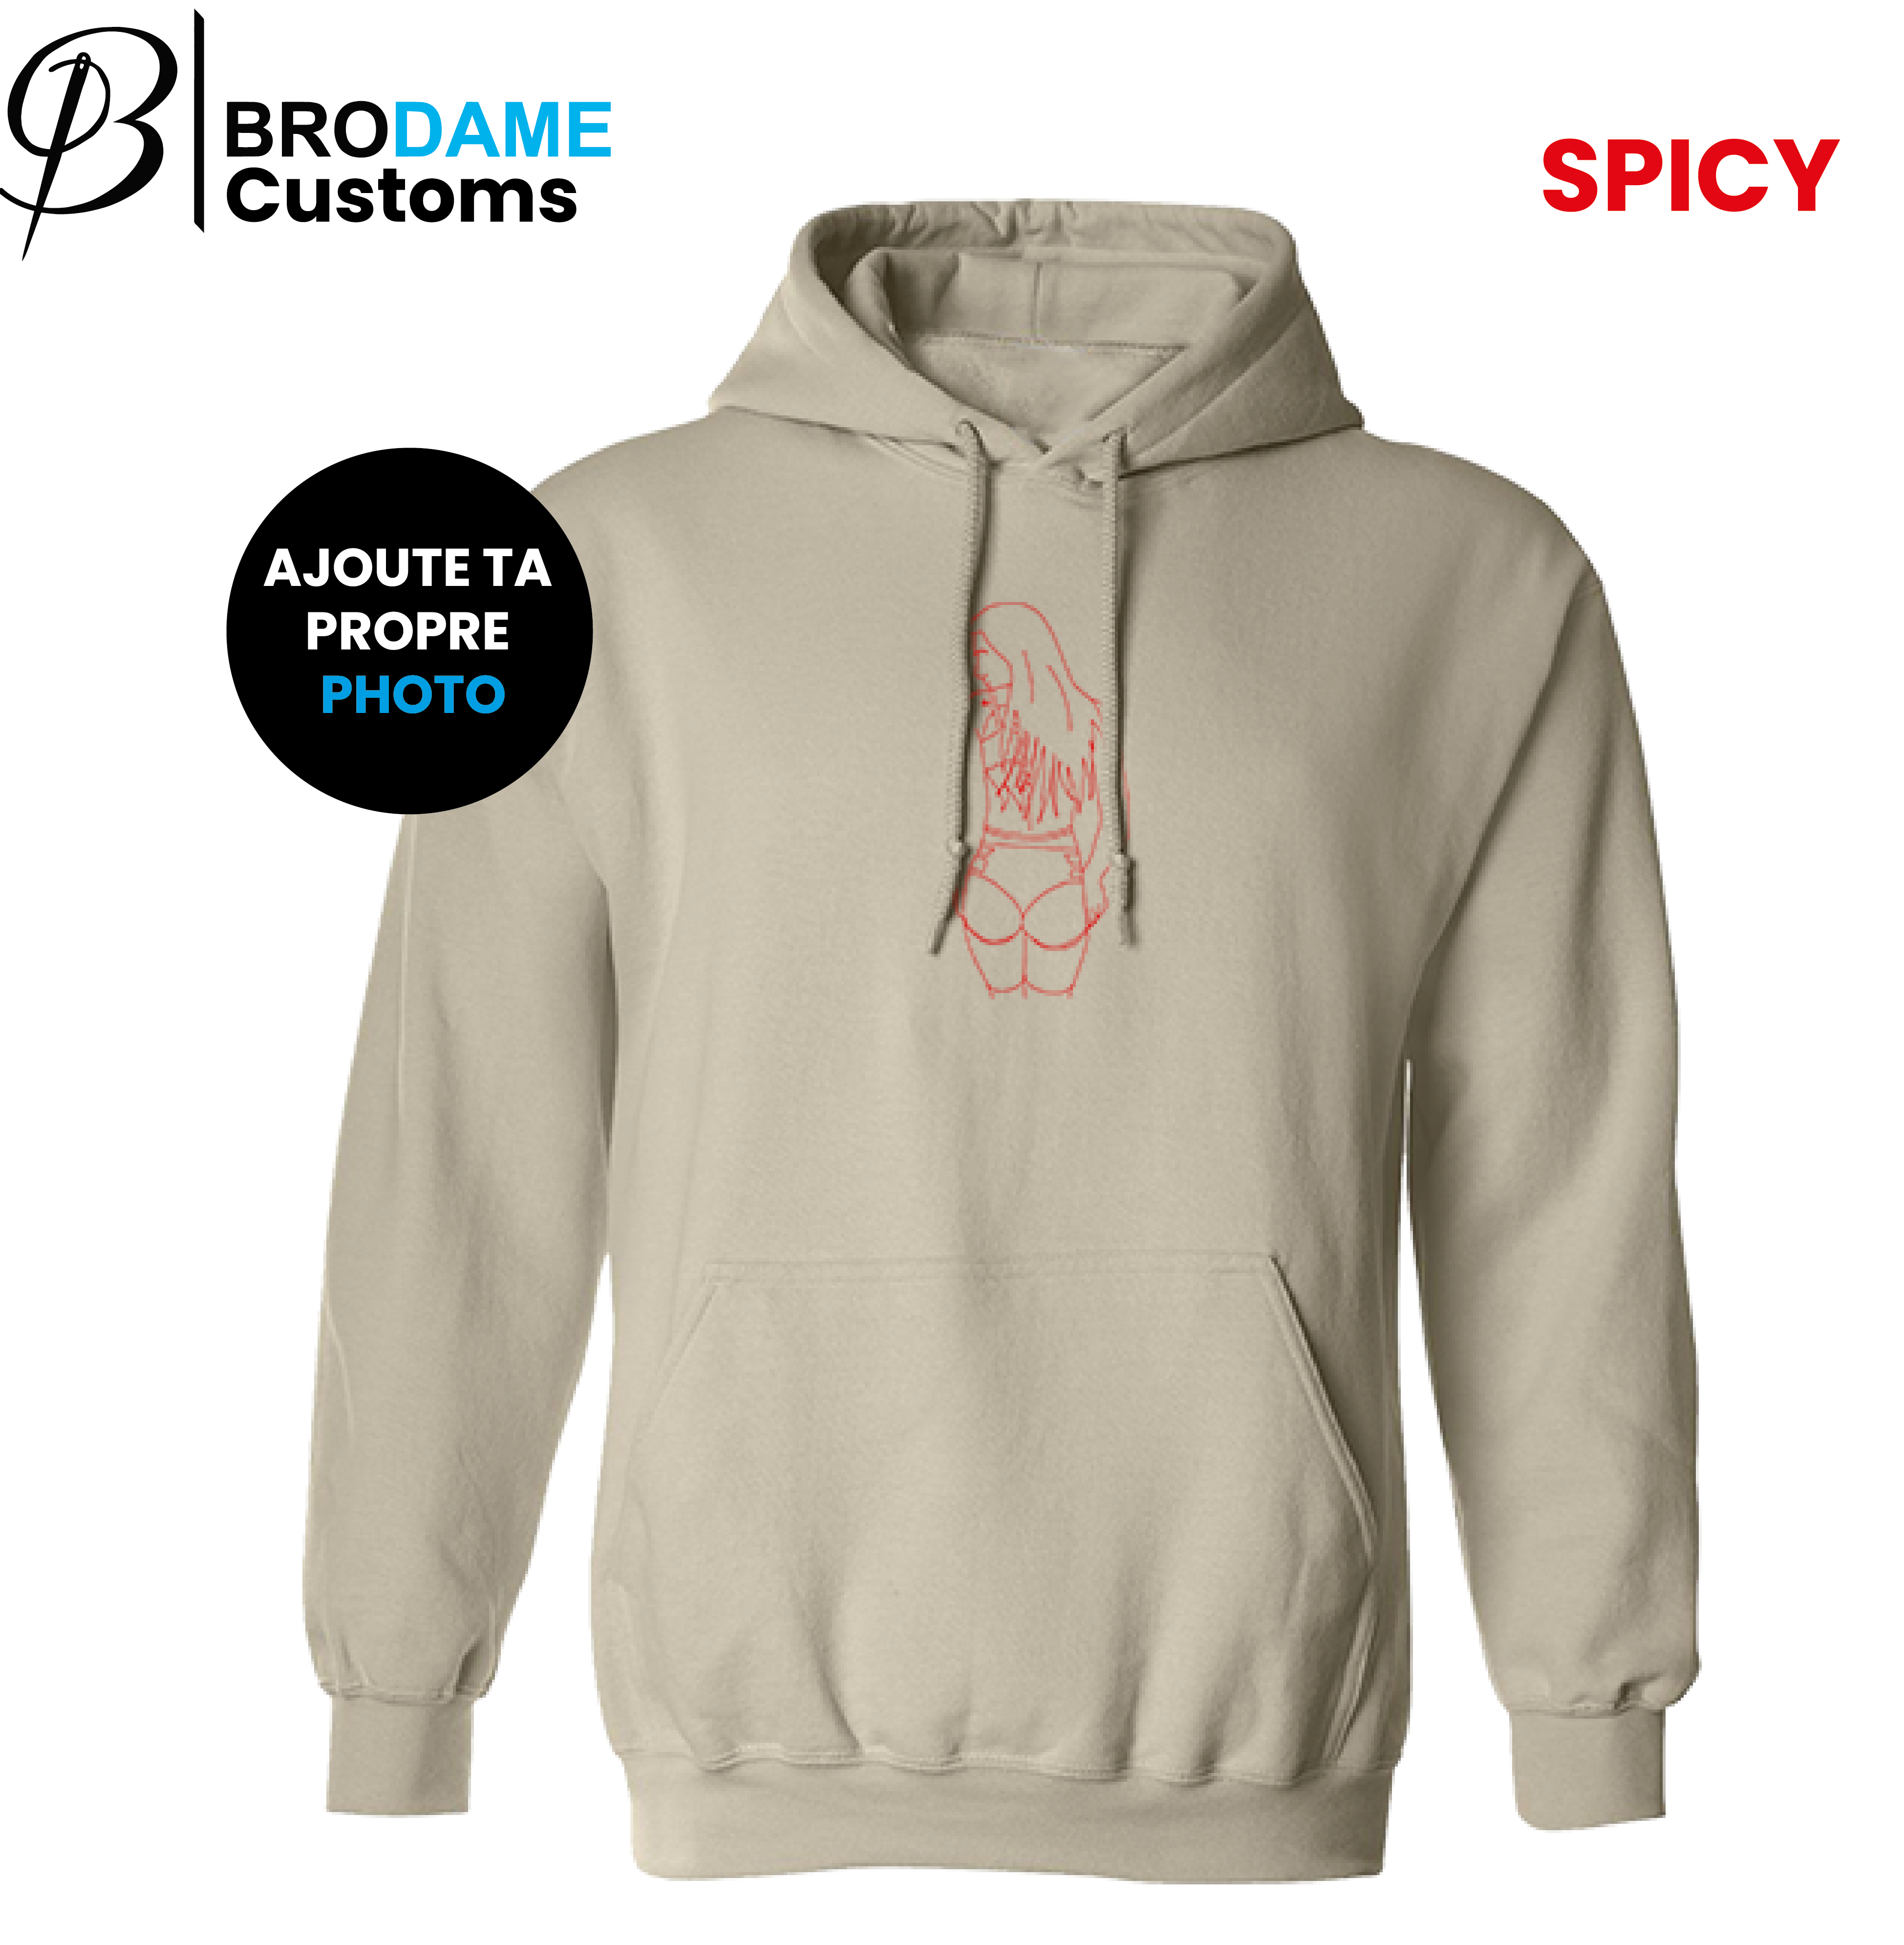 SPICY silhouette hoodie